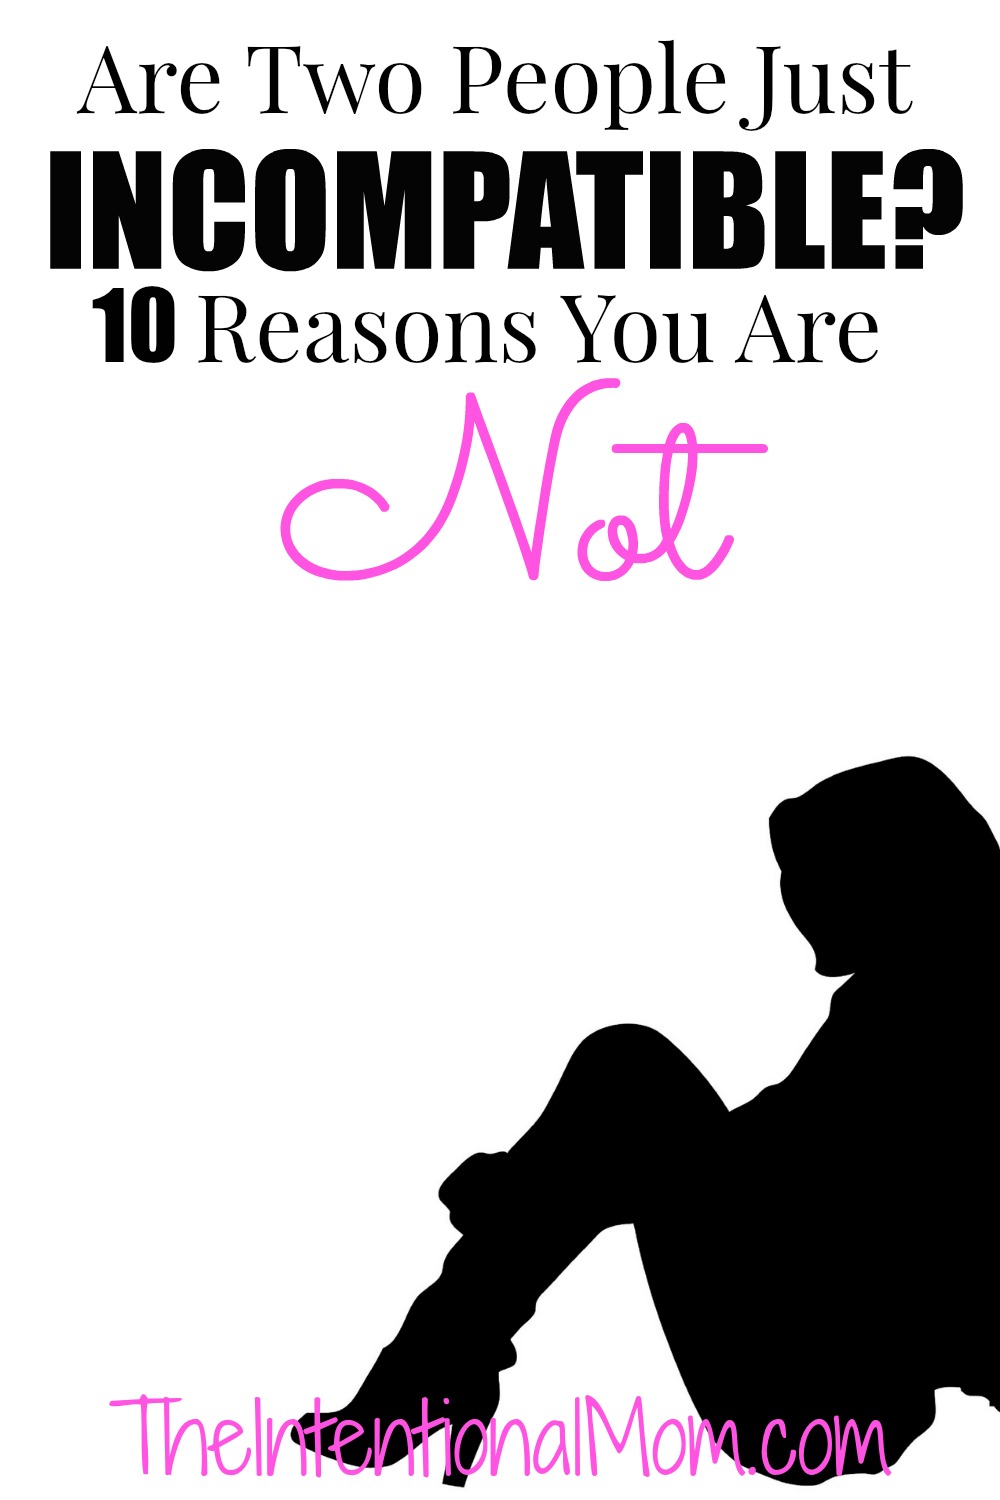 Are Two People Just Incompatible? 10 Reasons You Are Not